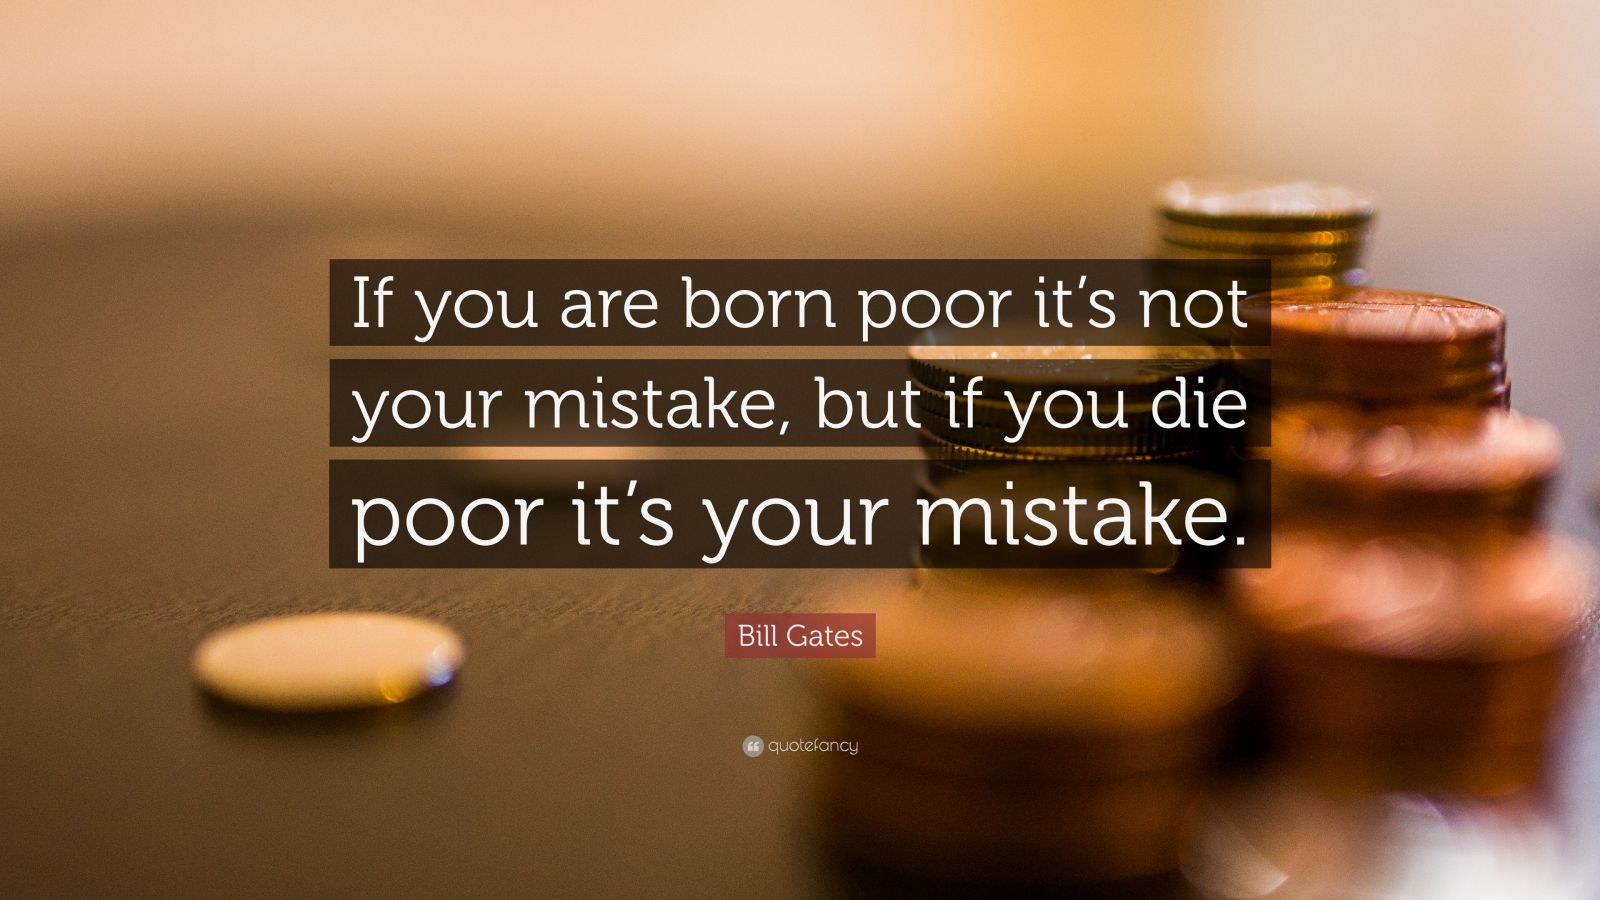 Bill Gates Quote: “If you are born poor its not your mistake, but if